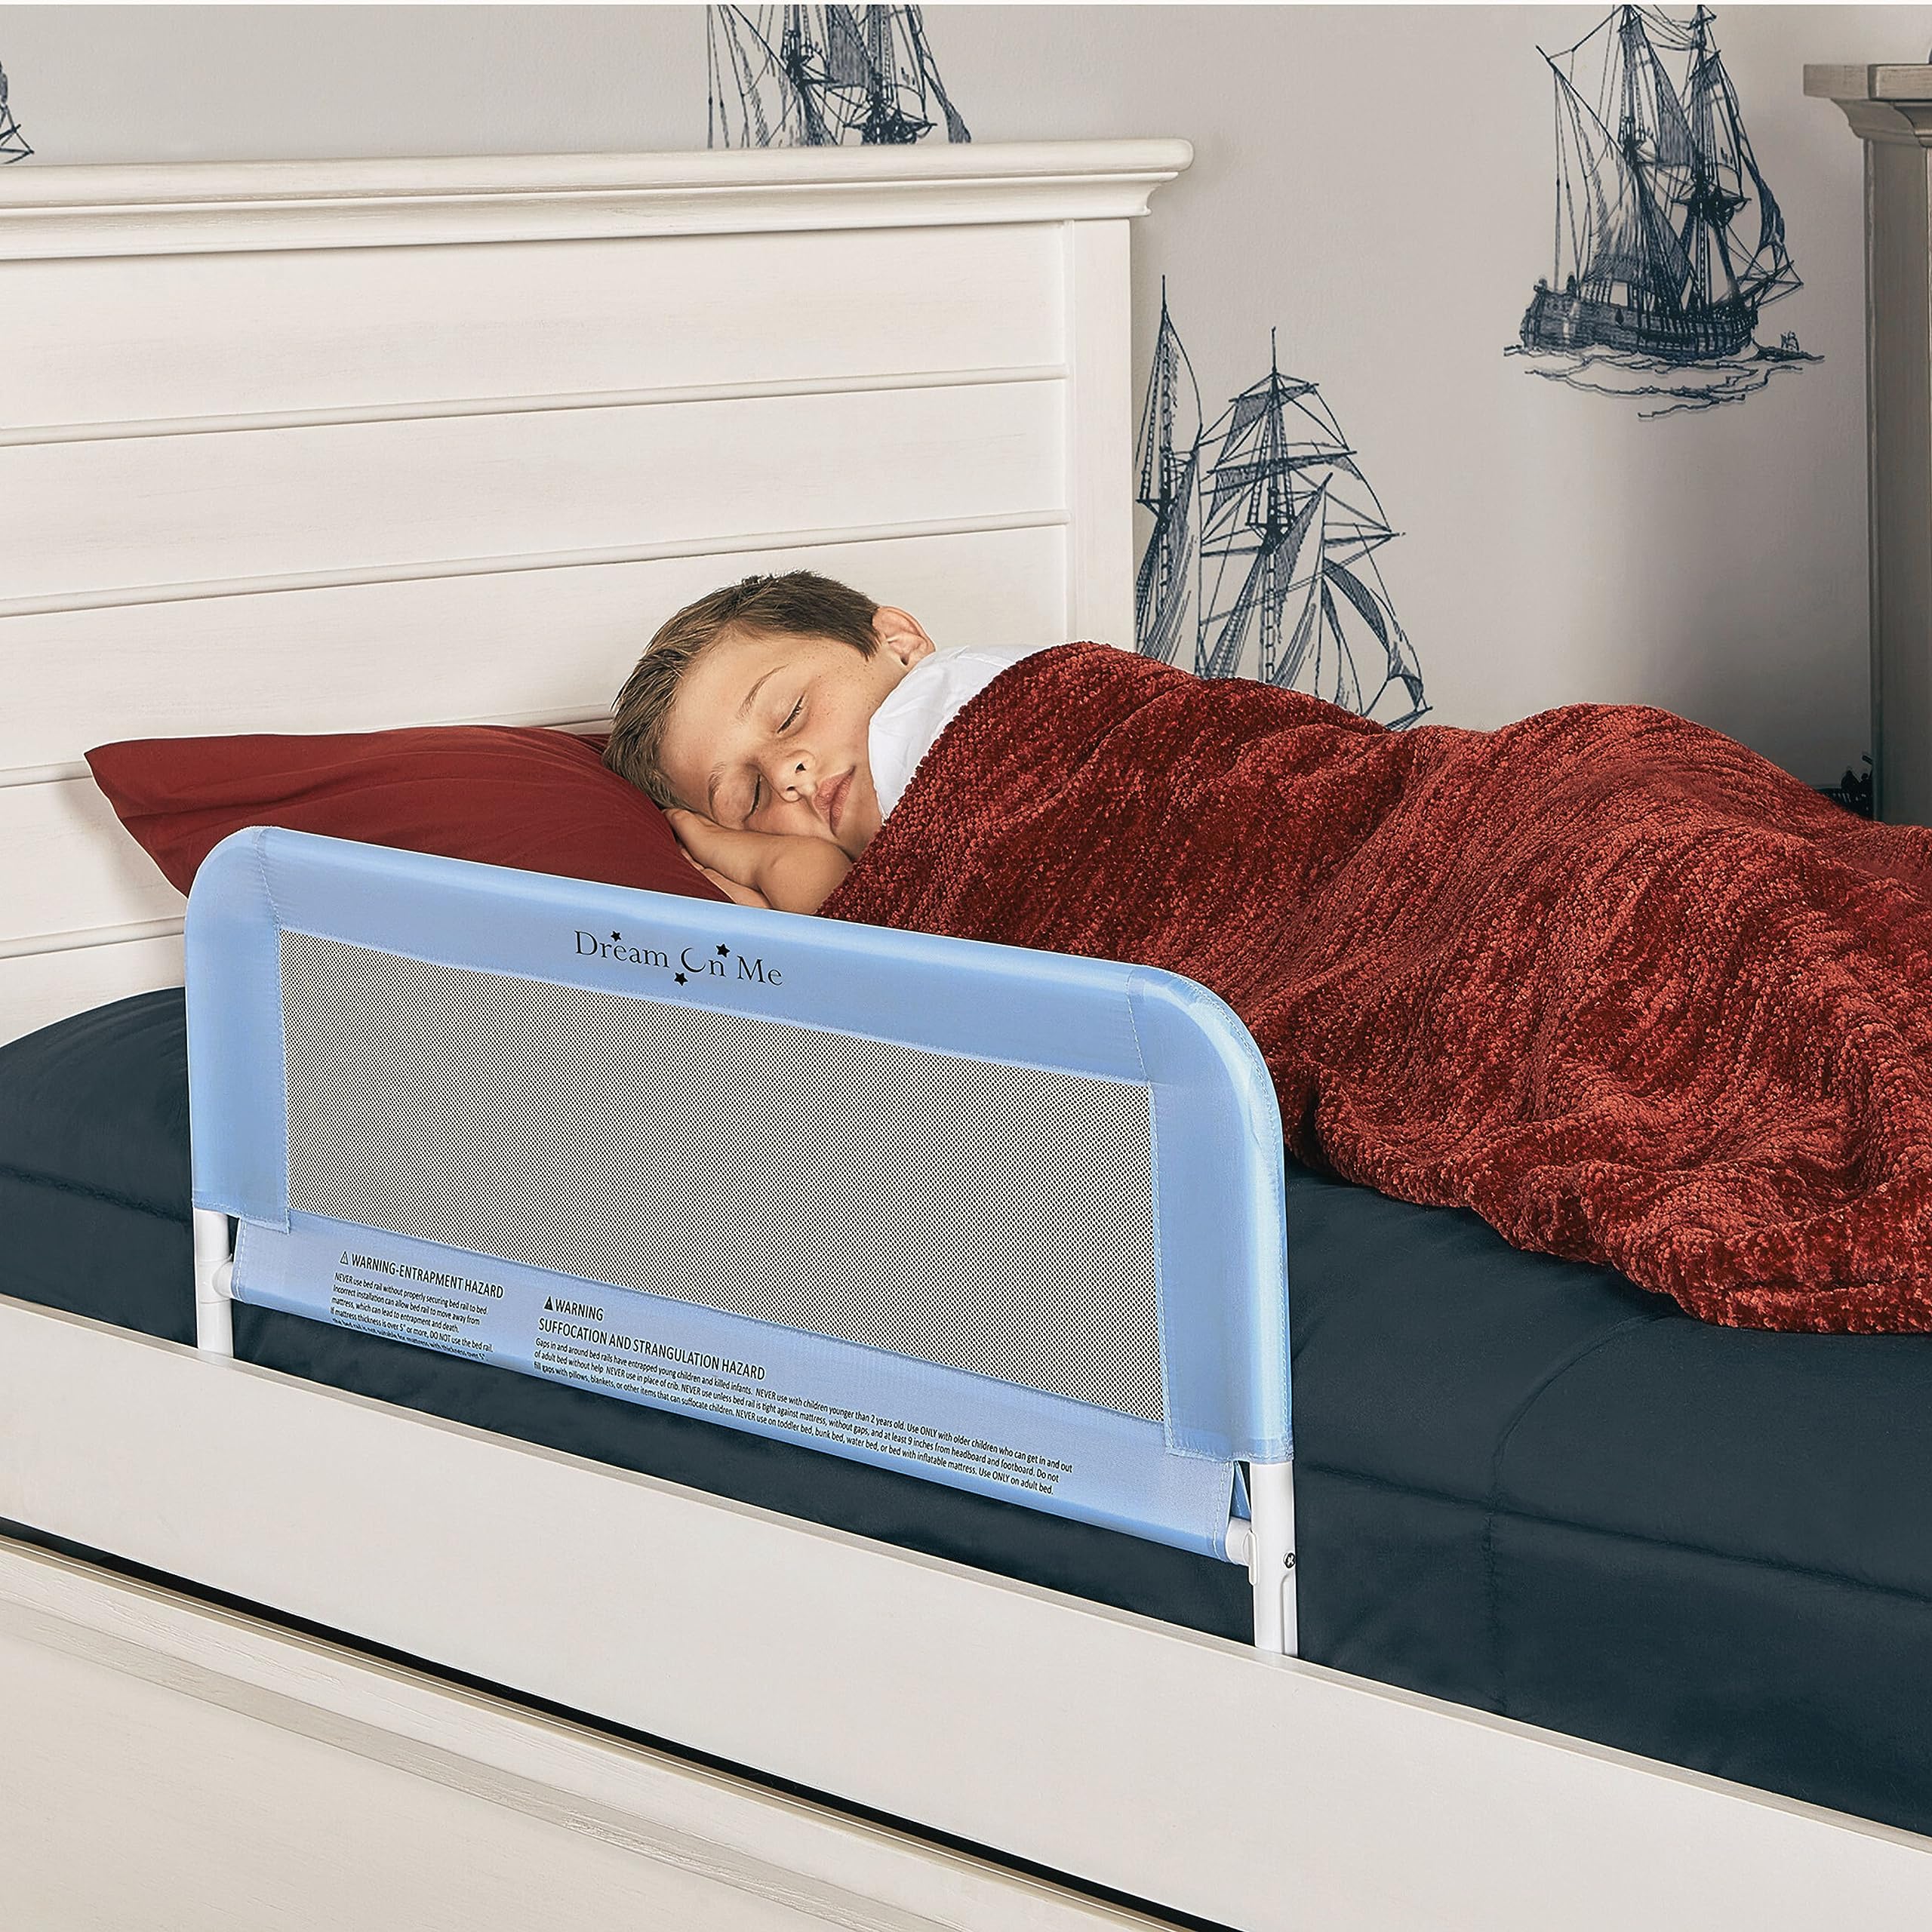 Dream On Me Lightweight Mesh Security Adjustable Bed Rail With Breathable Mesh Fabric In Blue